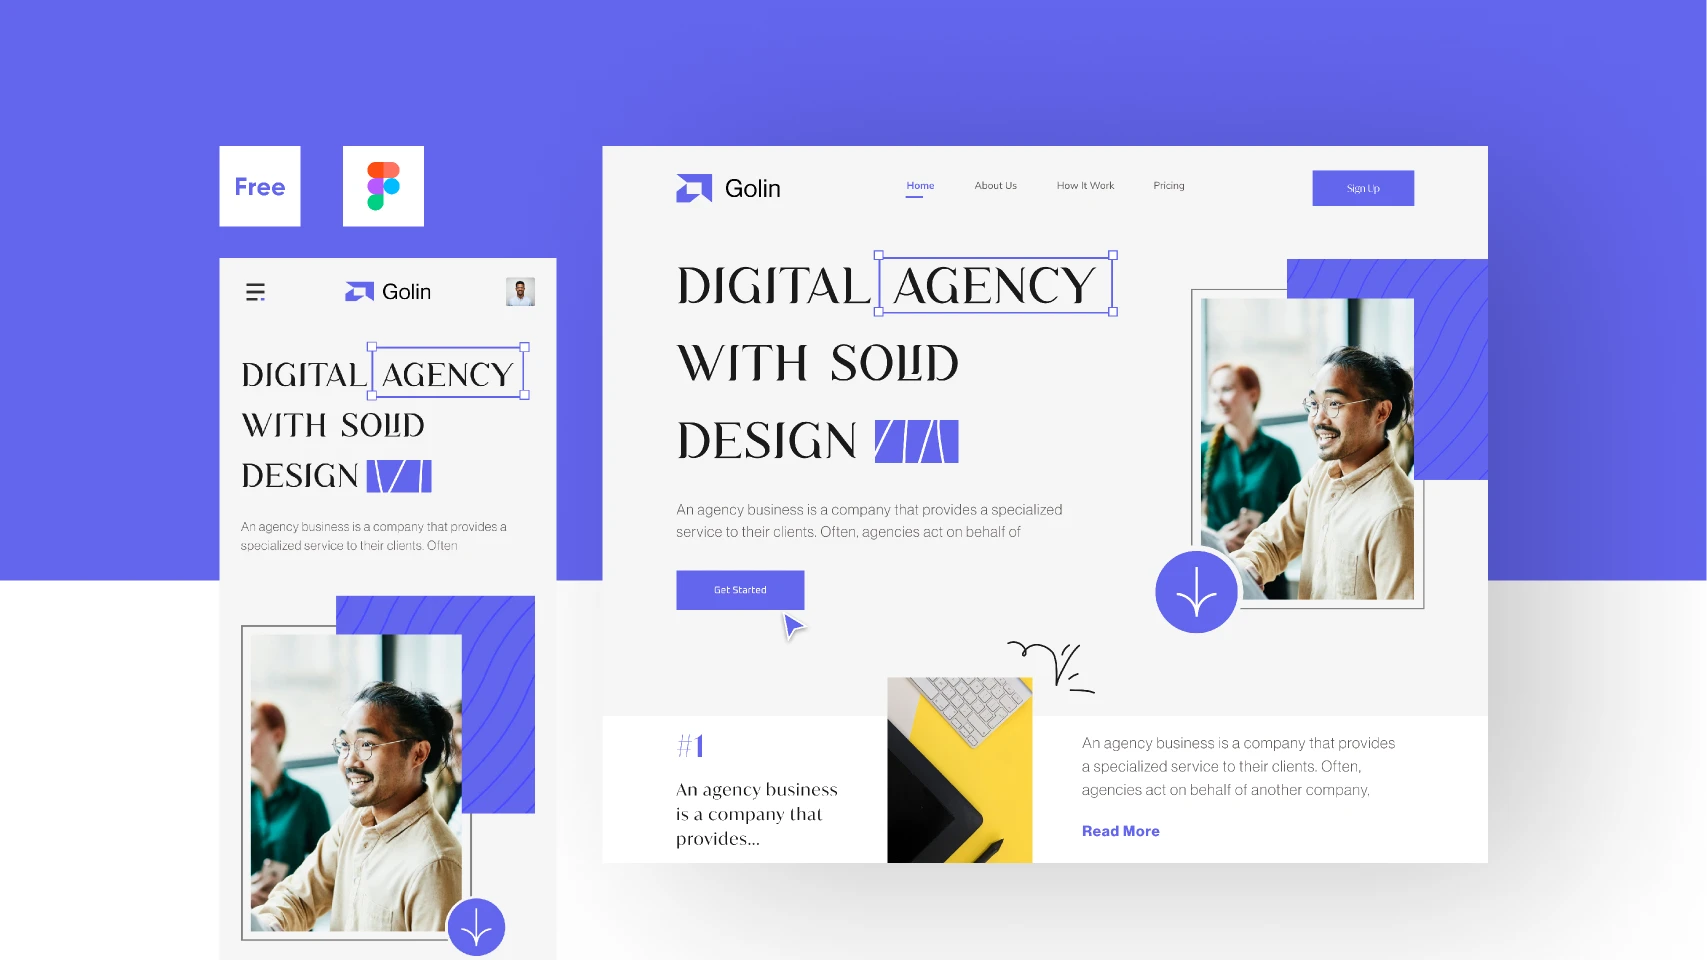 Creative Digital Agency Website Landing Page UI UX Design With Mobile Responsive for Figma and Adobe XD